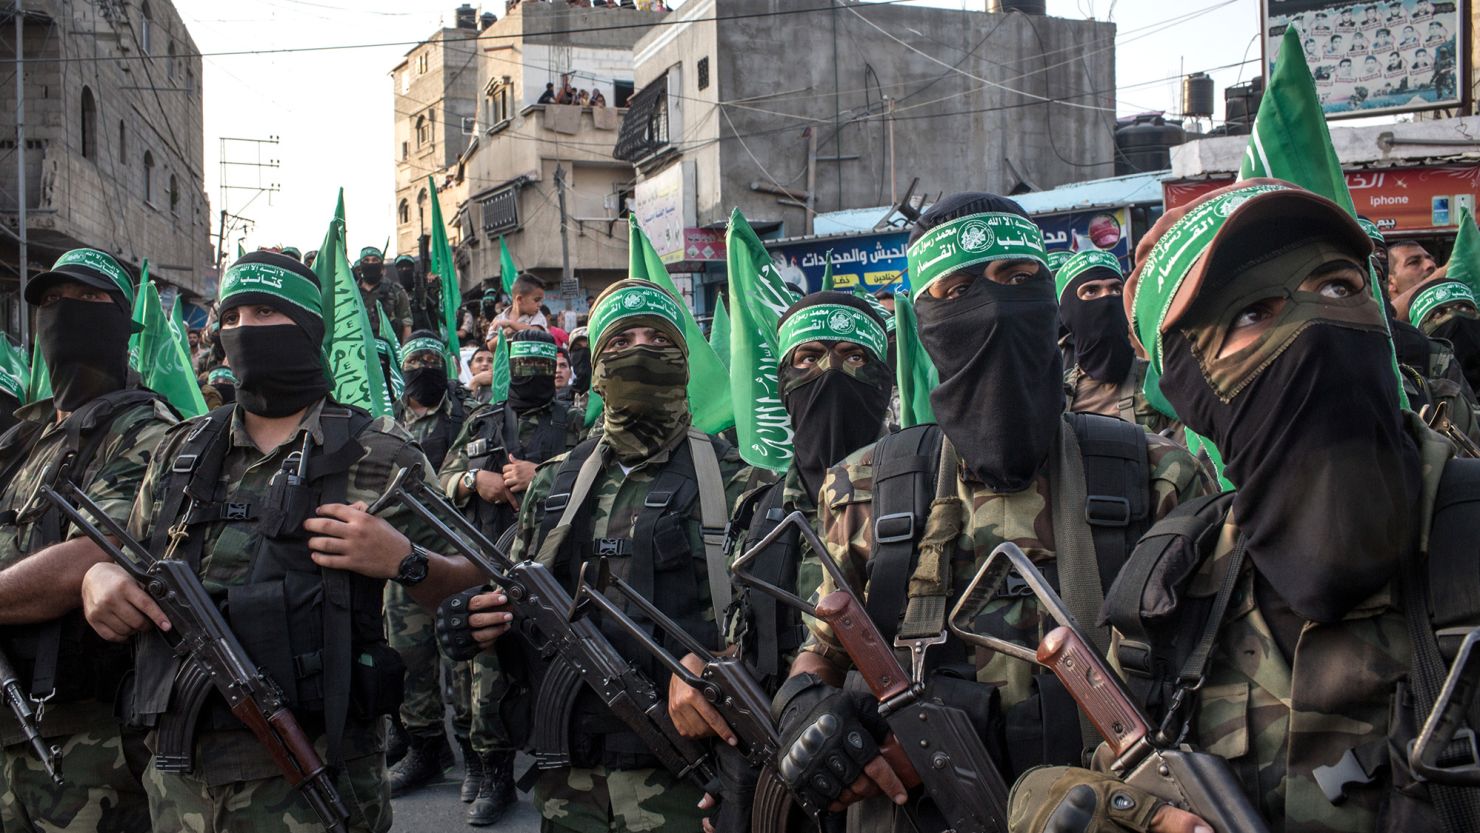 Palestinian Hamas militants are seen during a military show in the Bani Suheila district on July 20, 2017 in Gaza City, Gaza.